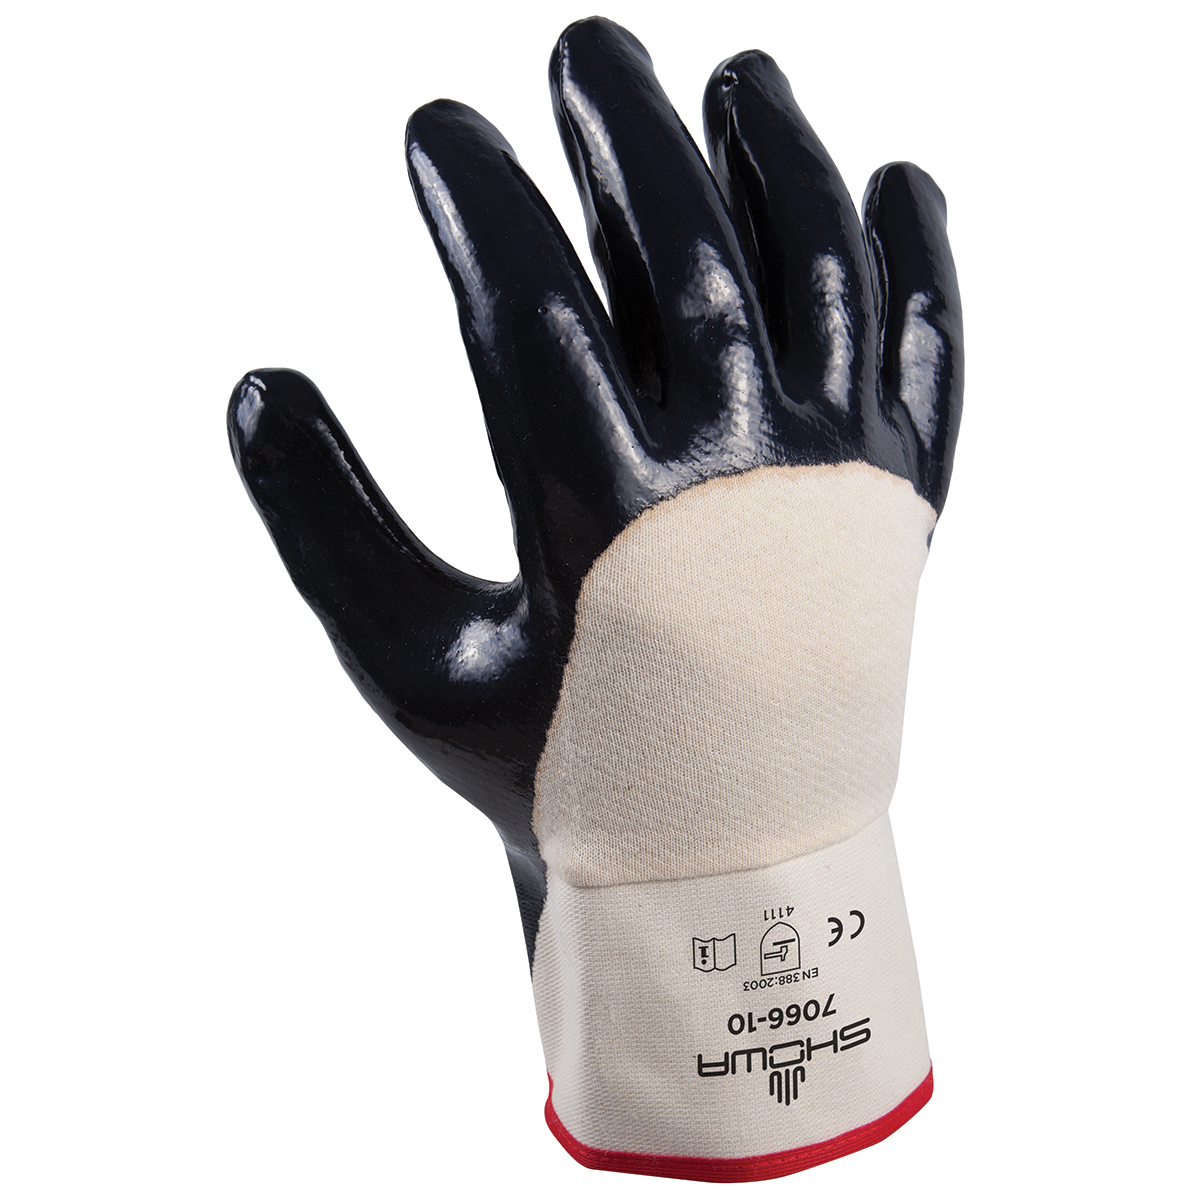 General purpose nitrile-coated, white w/navy dip, palm-coated rubberized safety cuff, medium